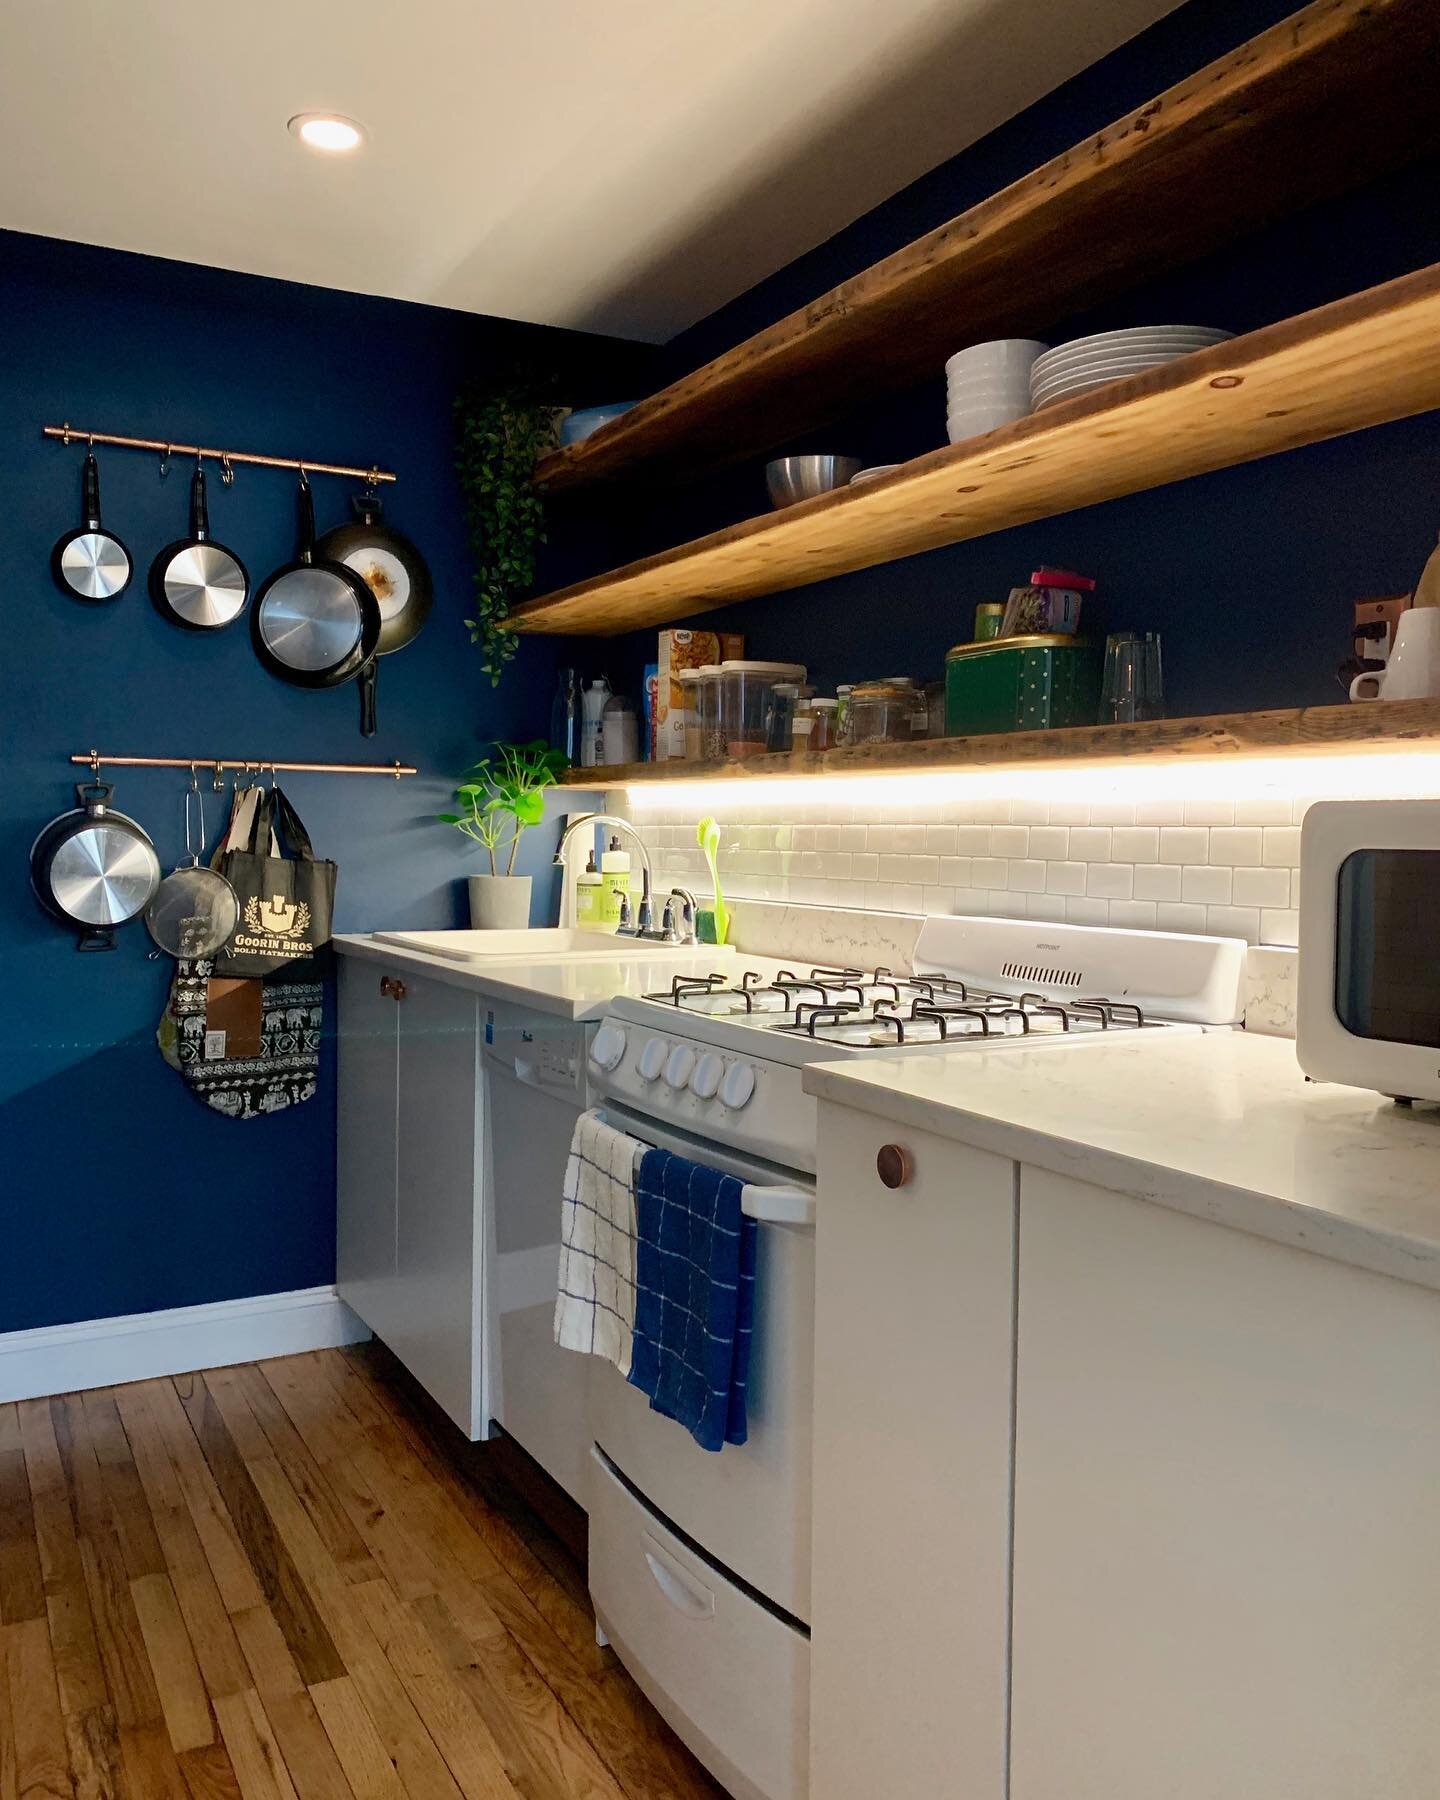 A Partial Renovation of a Park Slope Brooklyn Apartment featuring Ikea Cabinetry, Custom Reclaimed Wood Shelves, Refinishing of the Hardwood Floors, Painting and Lighting Upgrades. 
 
#brooklynbathroom #brownstone #parkslope #parkslopebrooklyn #brook